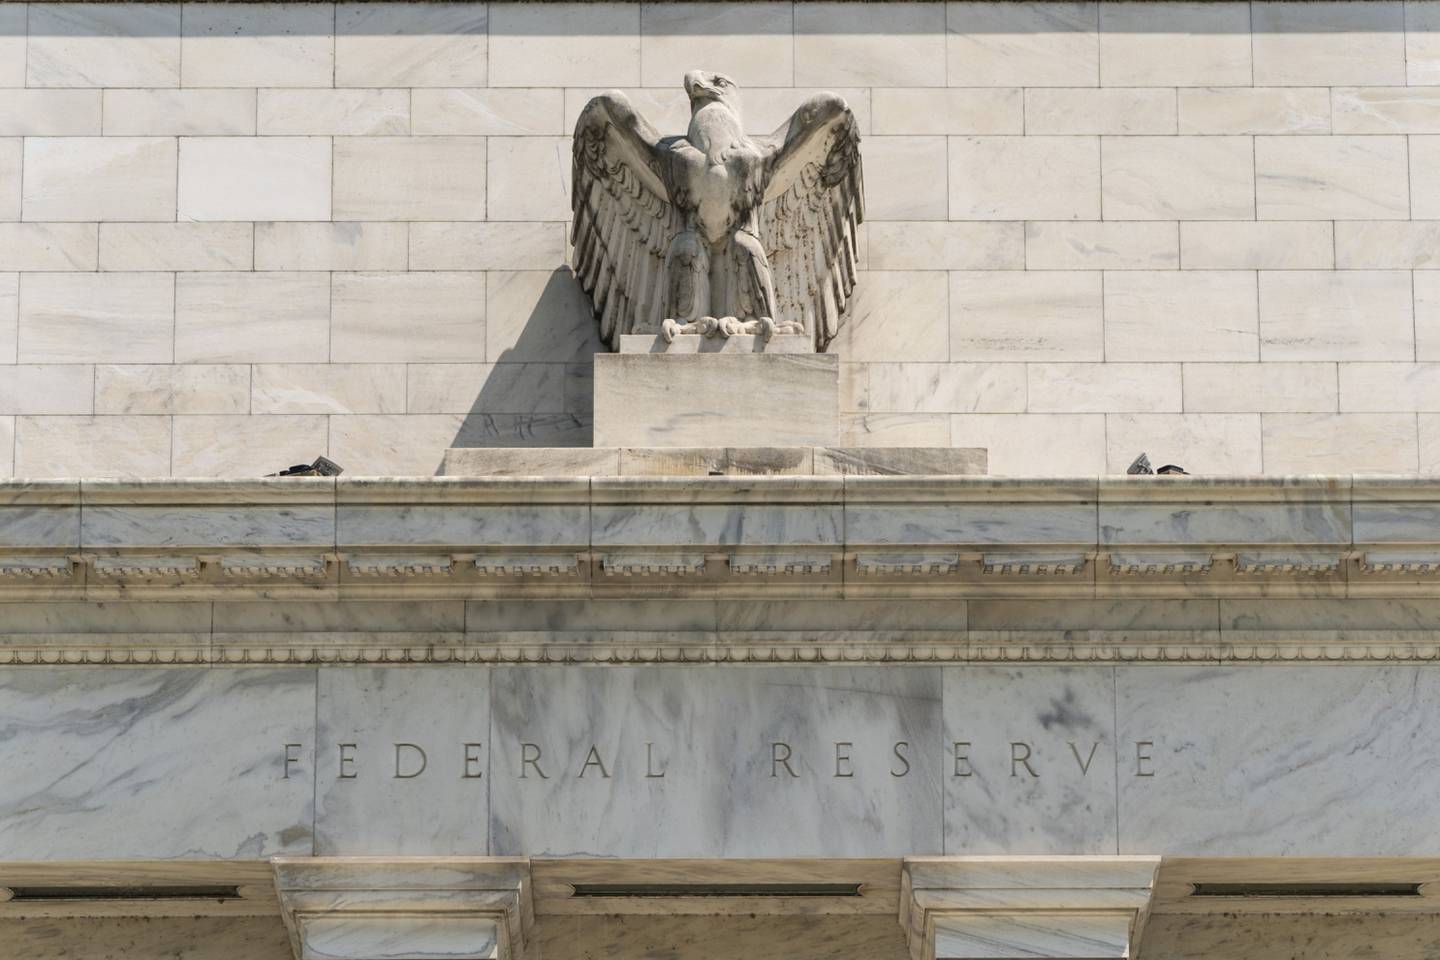 The Marriner S. Eccles Federal Reserve building in Washington, D.C., US, on Sunday, May 22, 2022. The Fed raised interest rates by 50 basis points earlier this month and the chairman indicated it was on track to make similar-sized moves at its meetings in June and July.